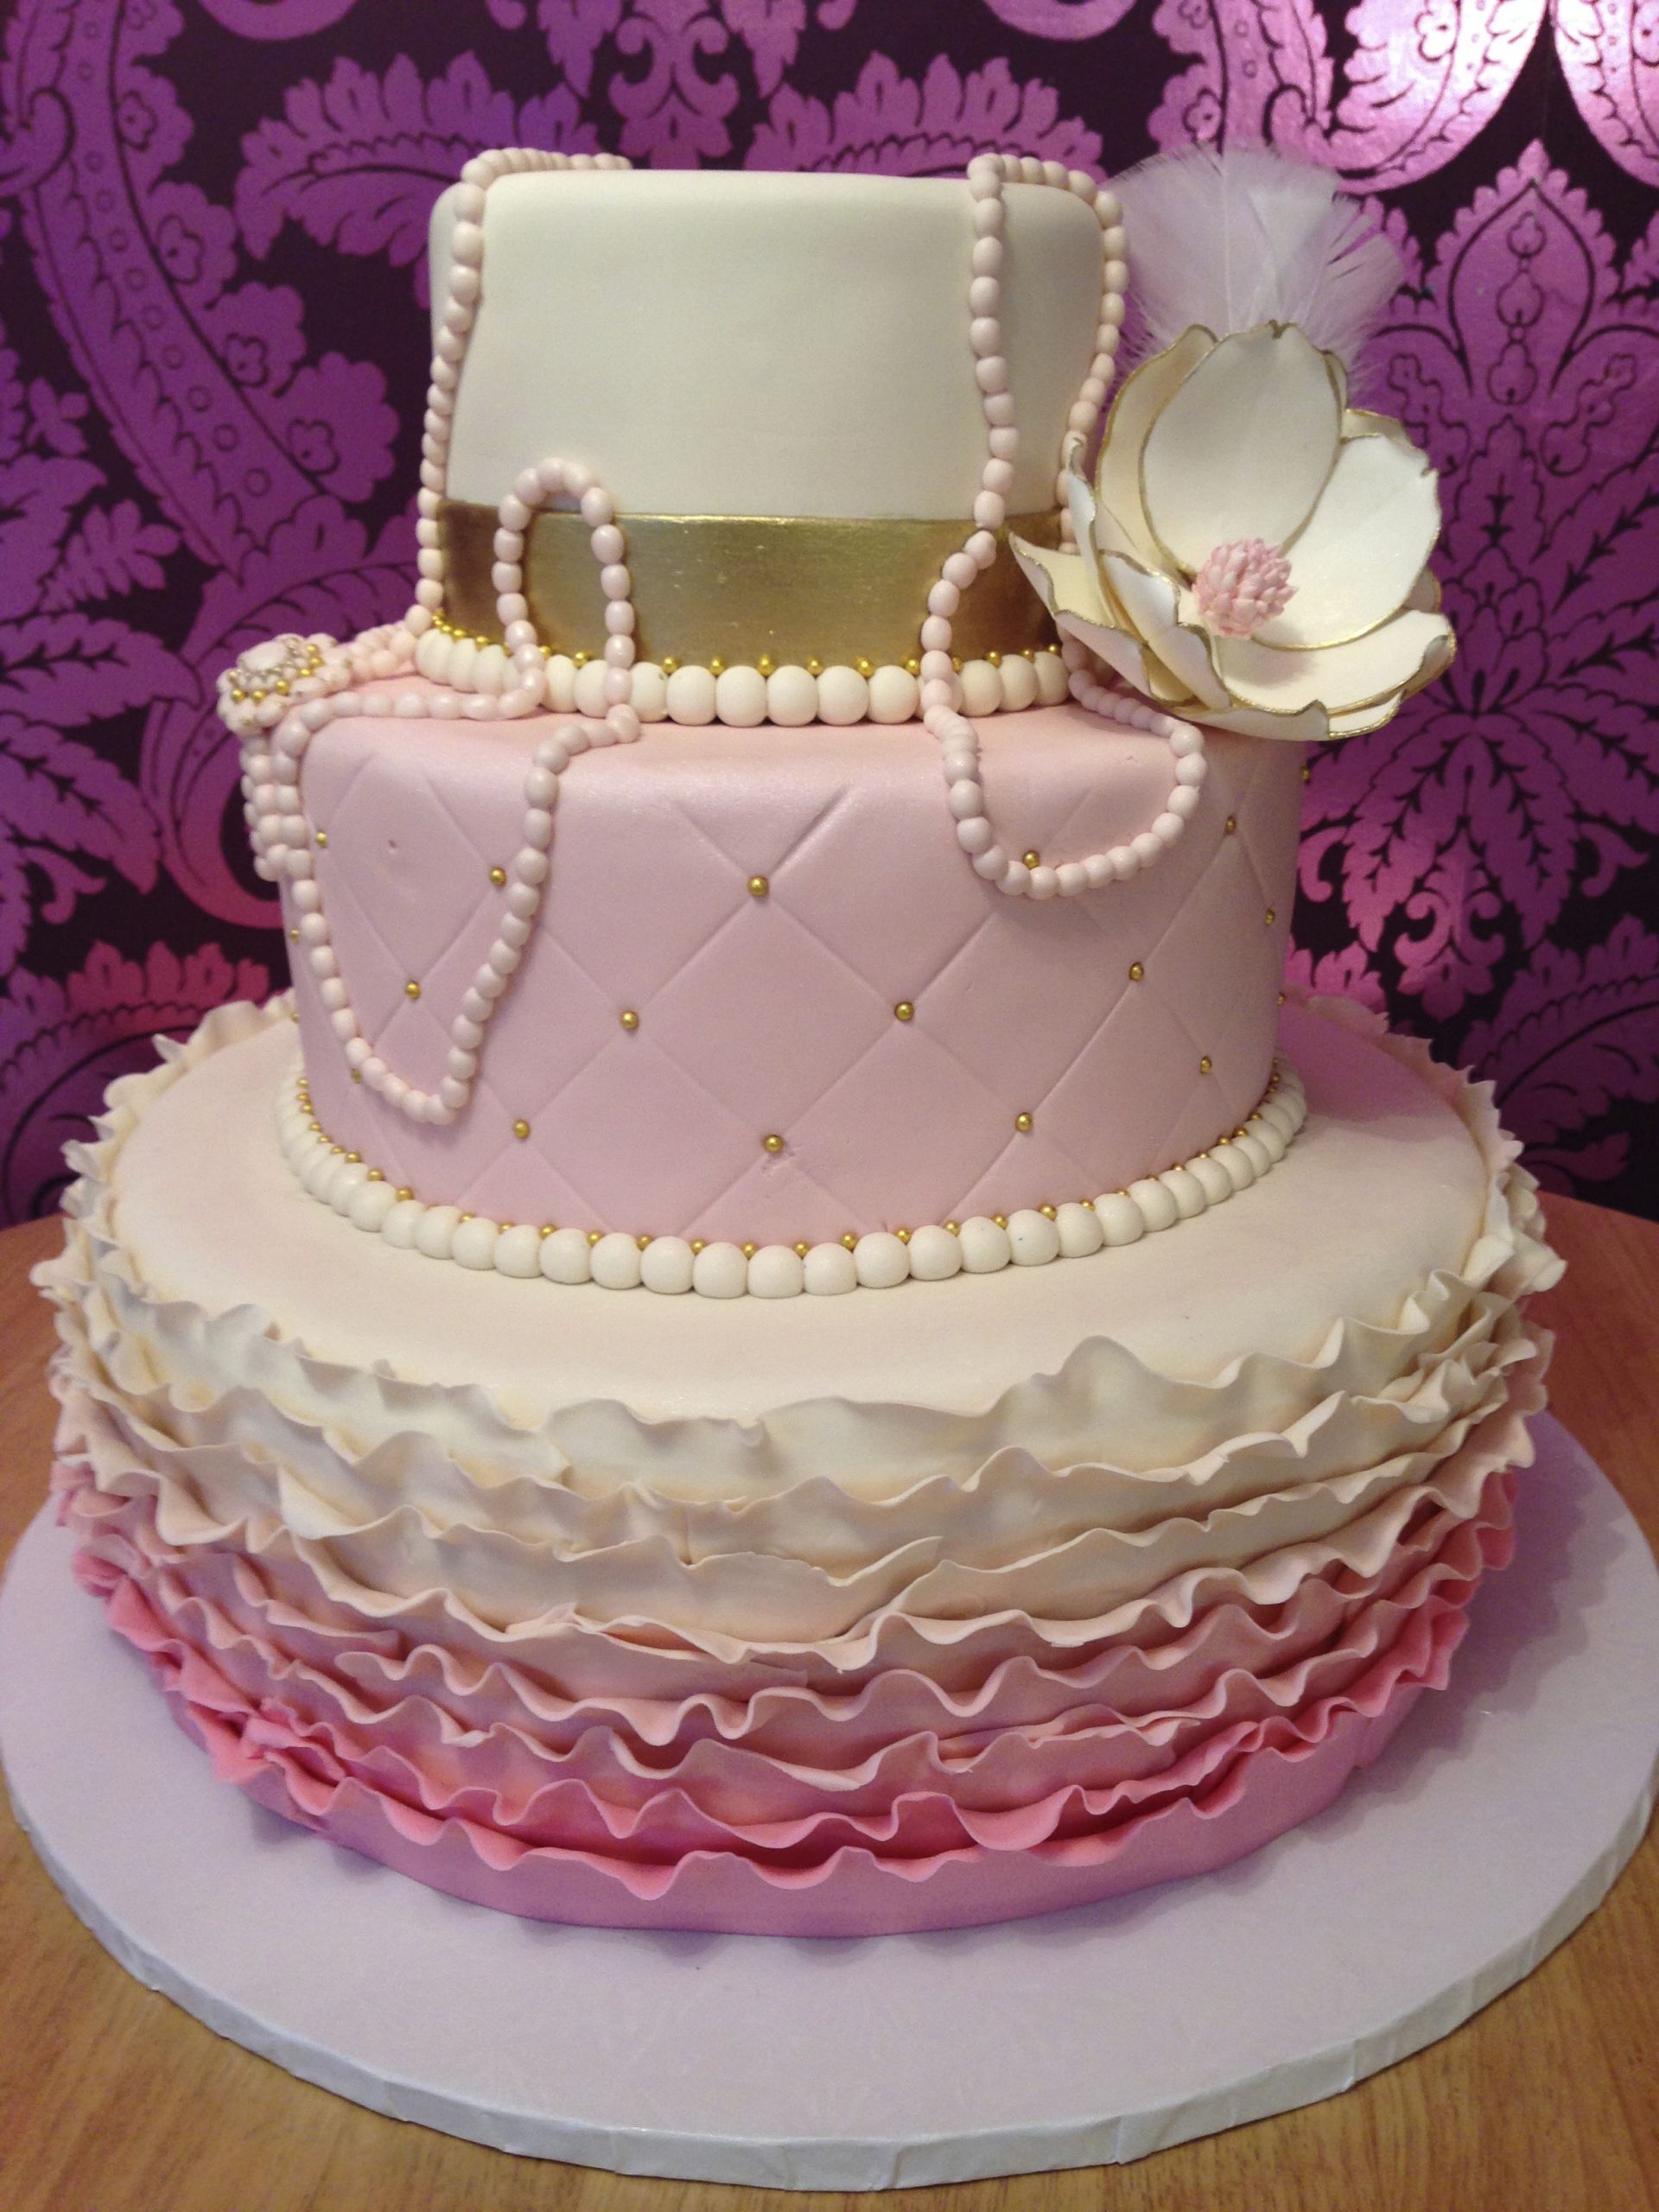 Birthday Cakes Images
 Birthday Cakes – The Cake Boutique